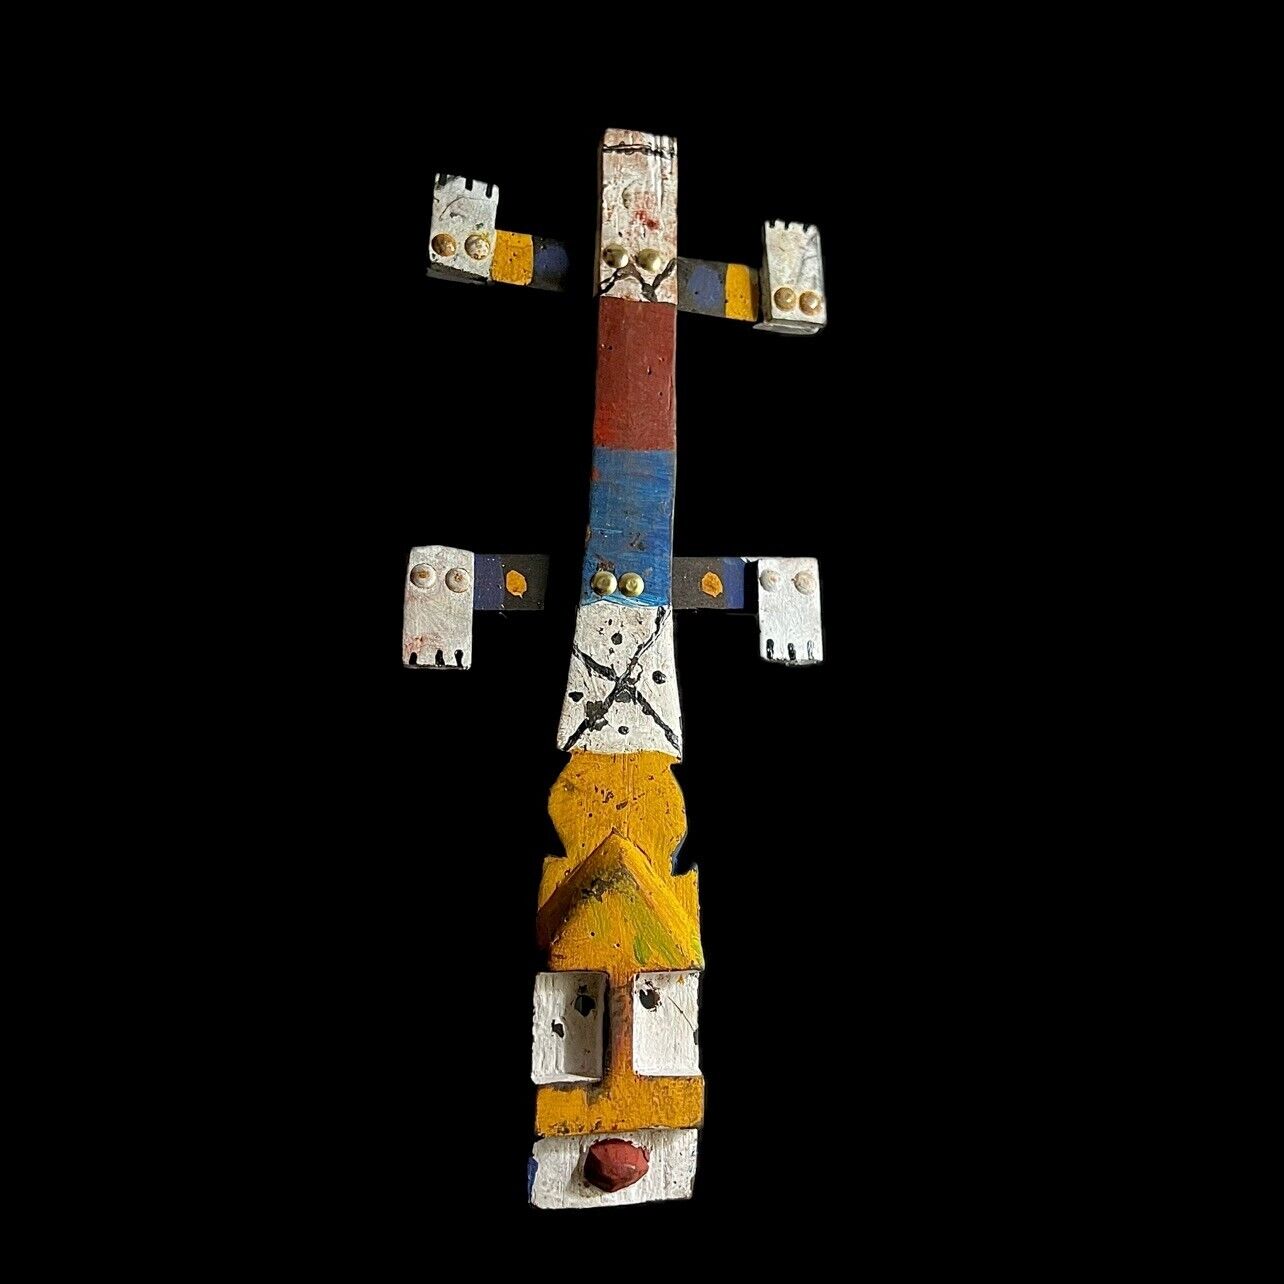 African Mask Kanaga African Mask from the Dogon tribe Wall Hanging-G1473